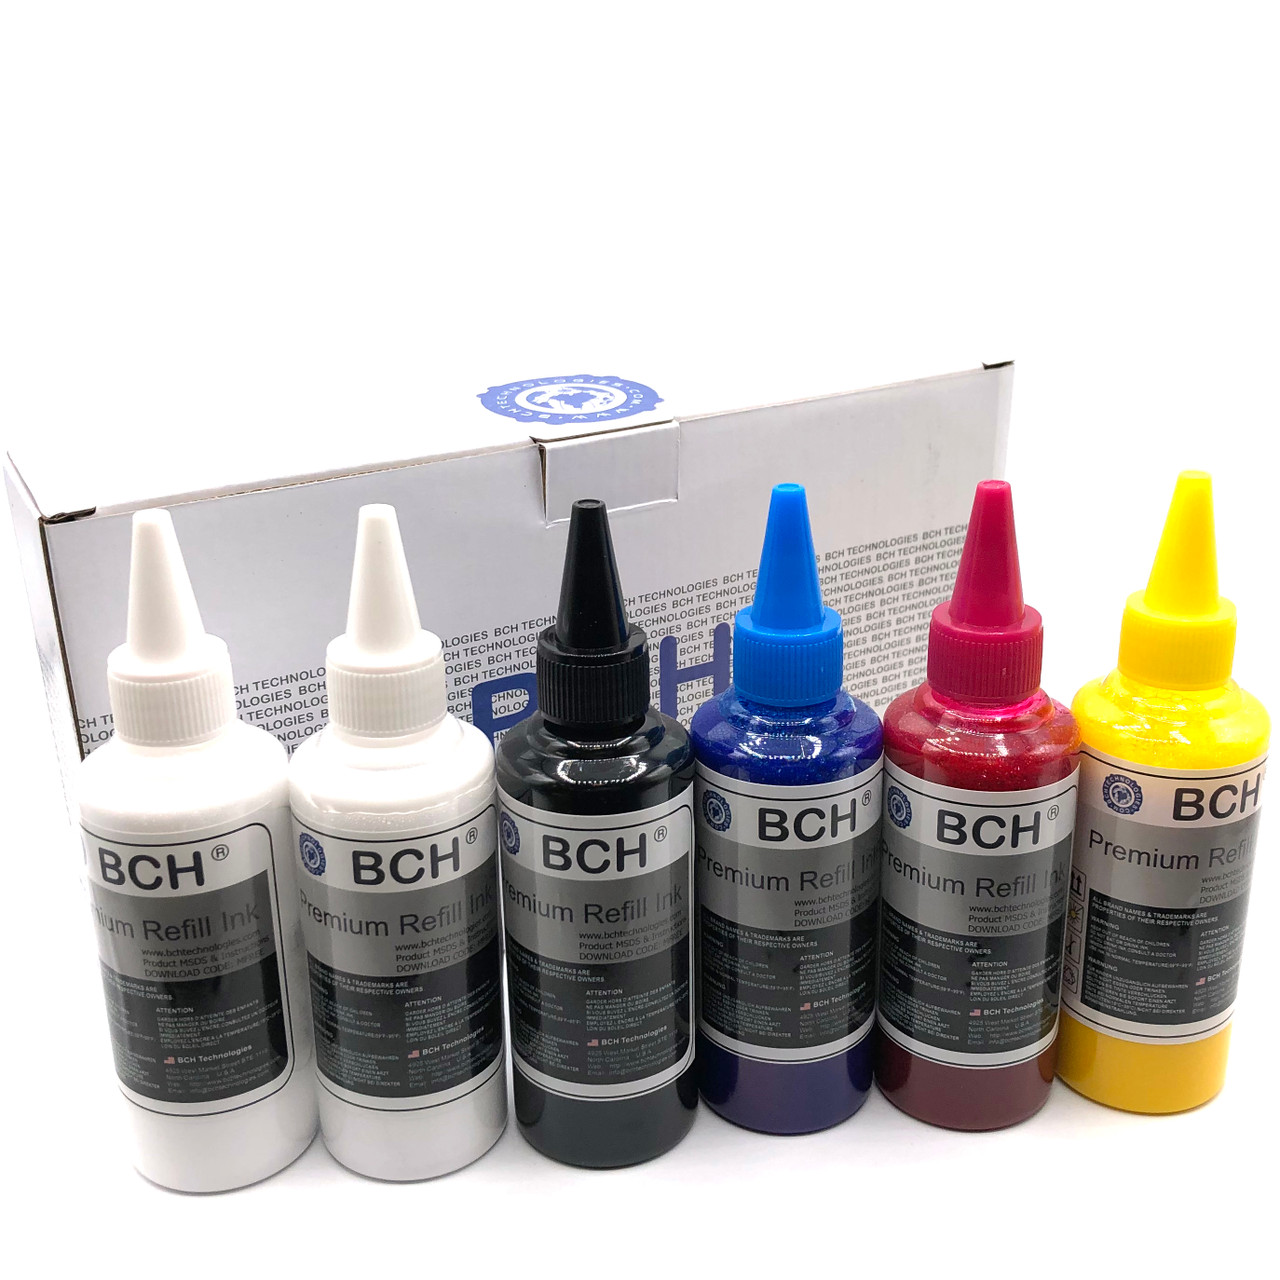 DTF Printers and supplies! DTF Film Ink and Powder all in stock ready for  quick shipping.